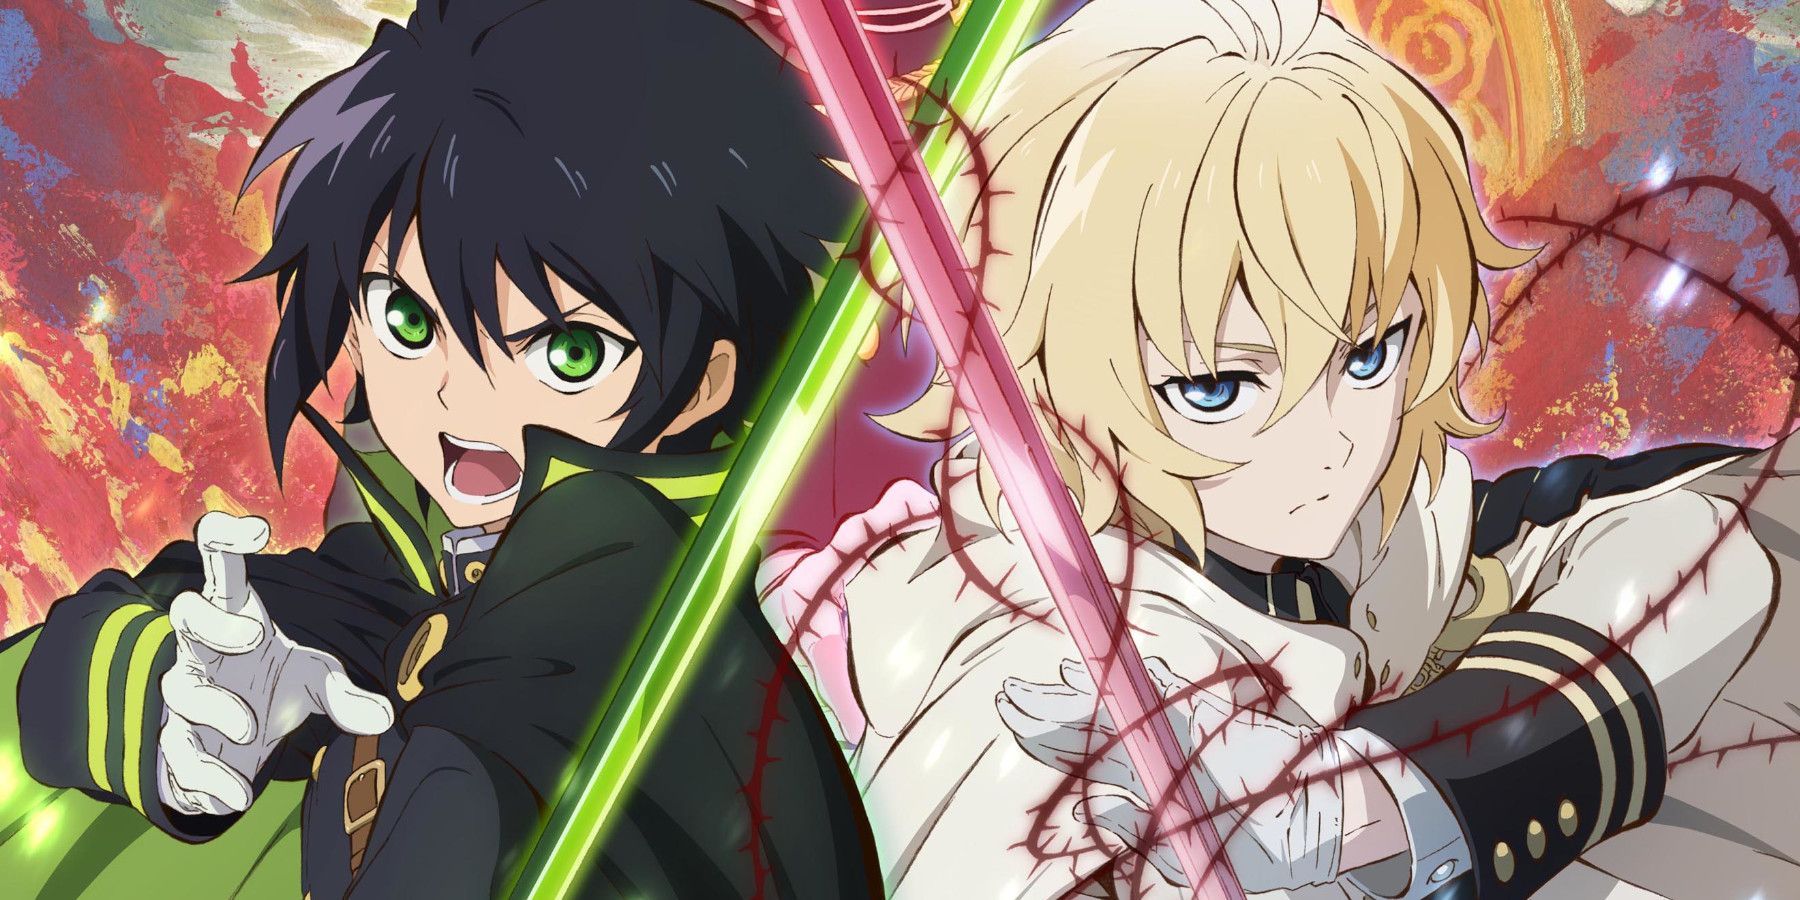 Seraph of the End: An Unfinished Gem From The Creators of Attack on Tian